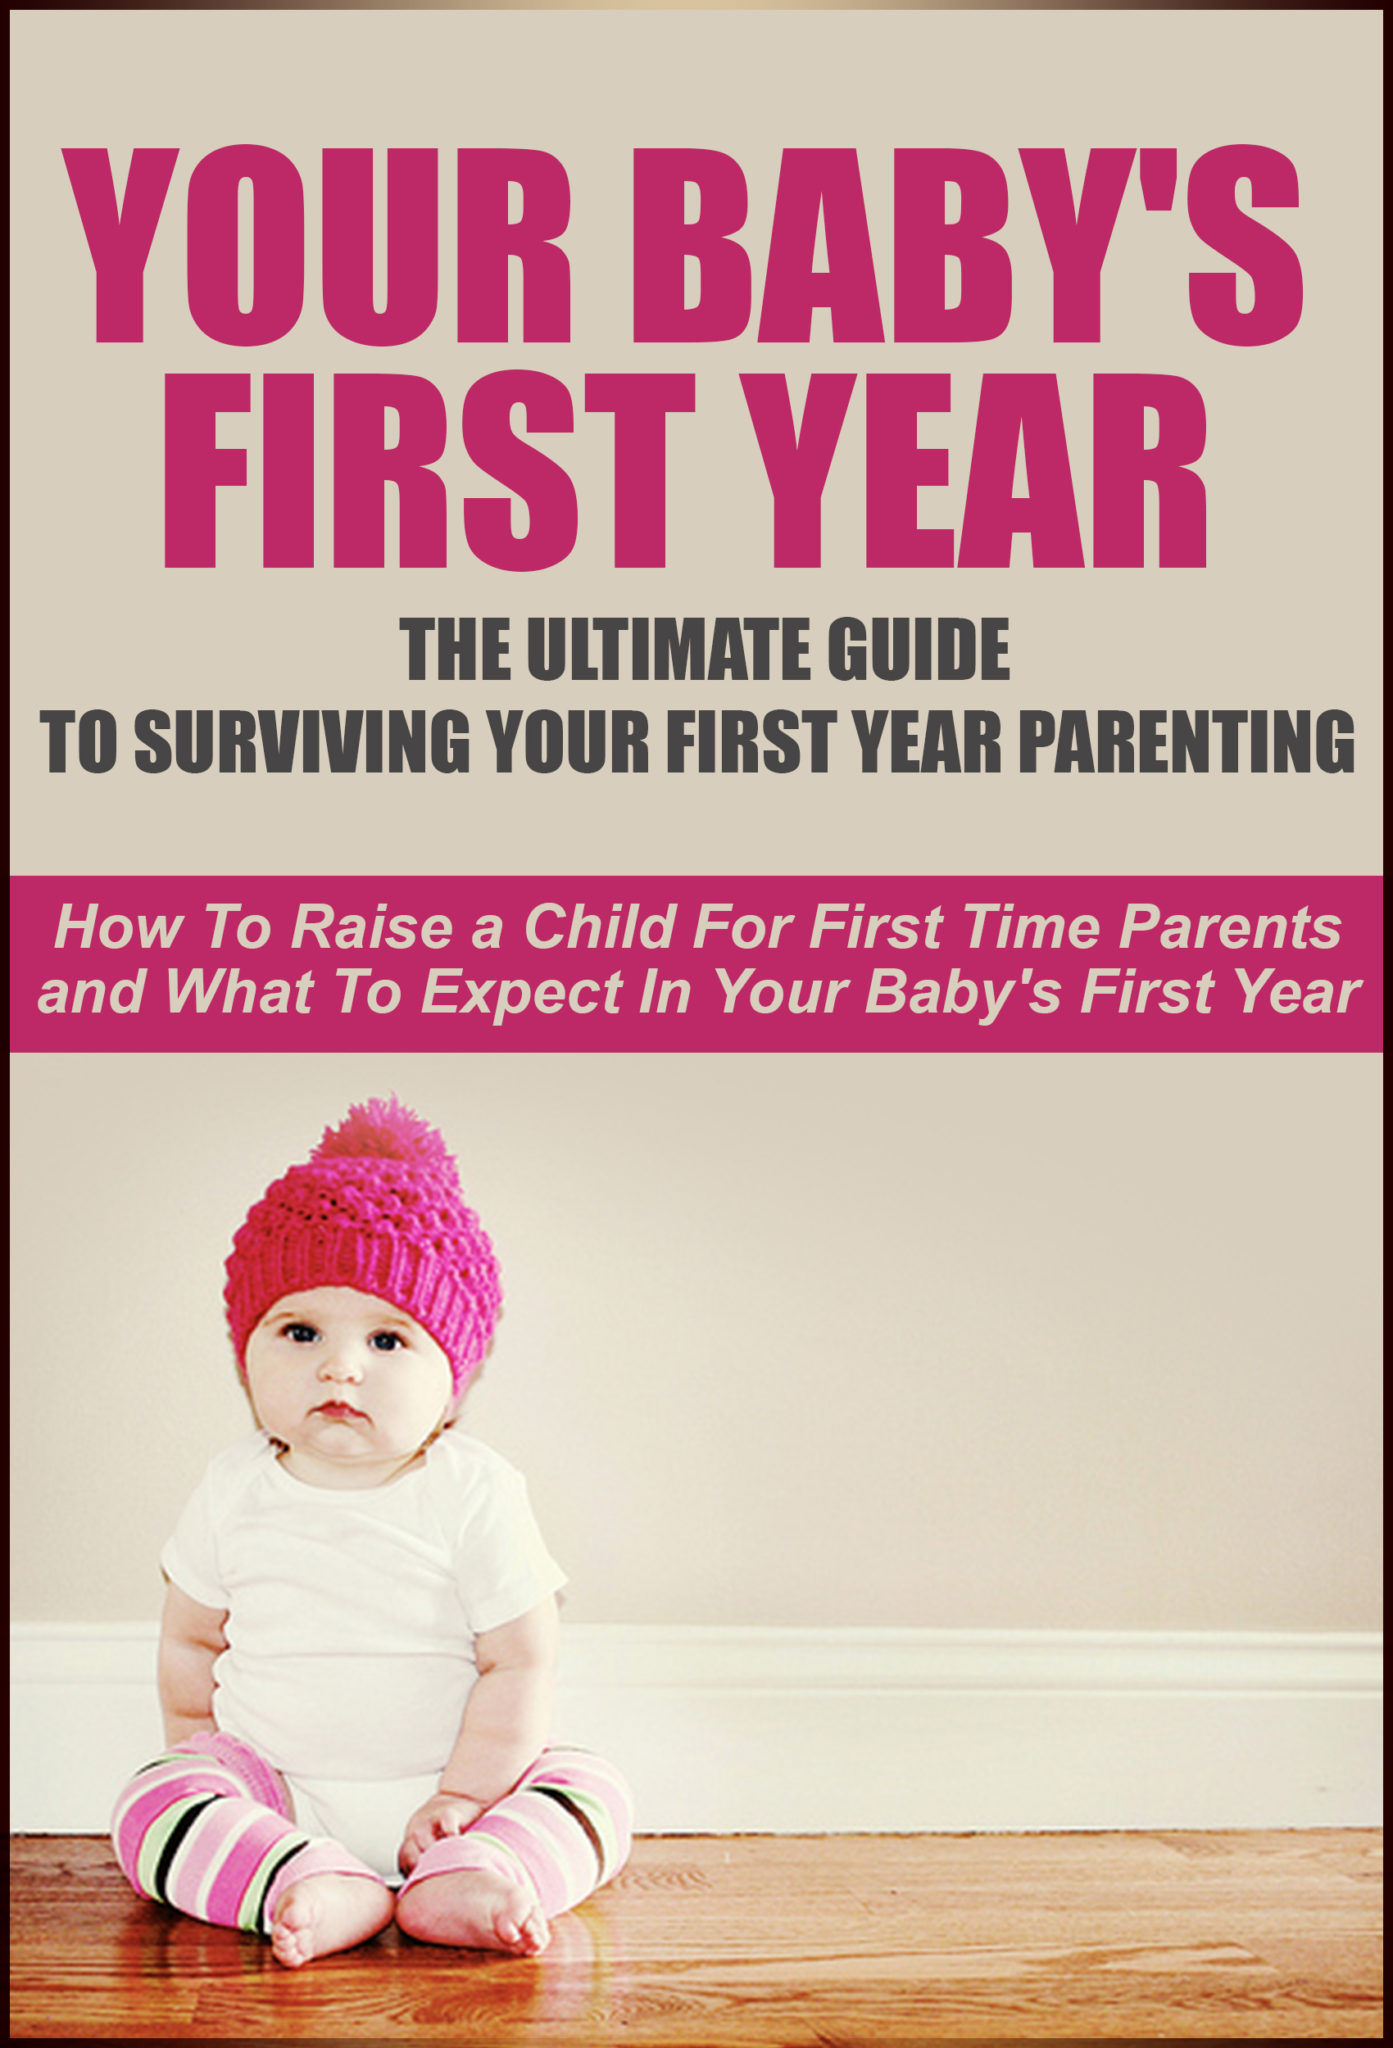 Your Baby’s First Year: The Ultimate Guide To Surviving Your First Year Parenting: How To Raise A Child For First Time Parents And What To Expect In Your First Year Parenting … First Year Baby Care, First Year Parenting by Danielle Johnson